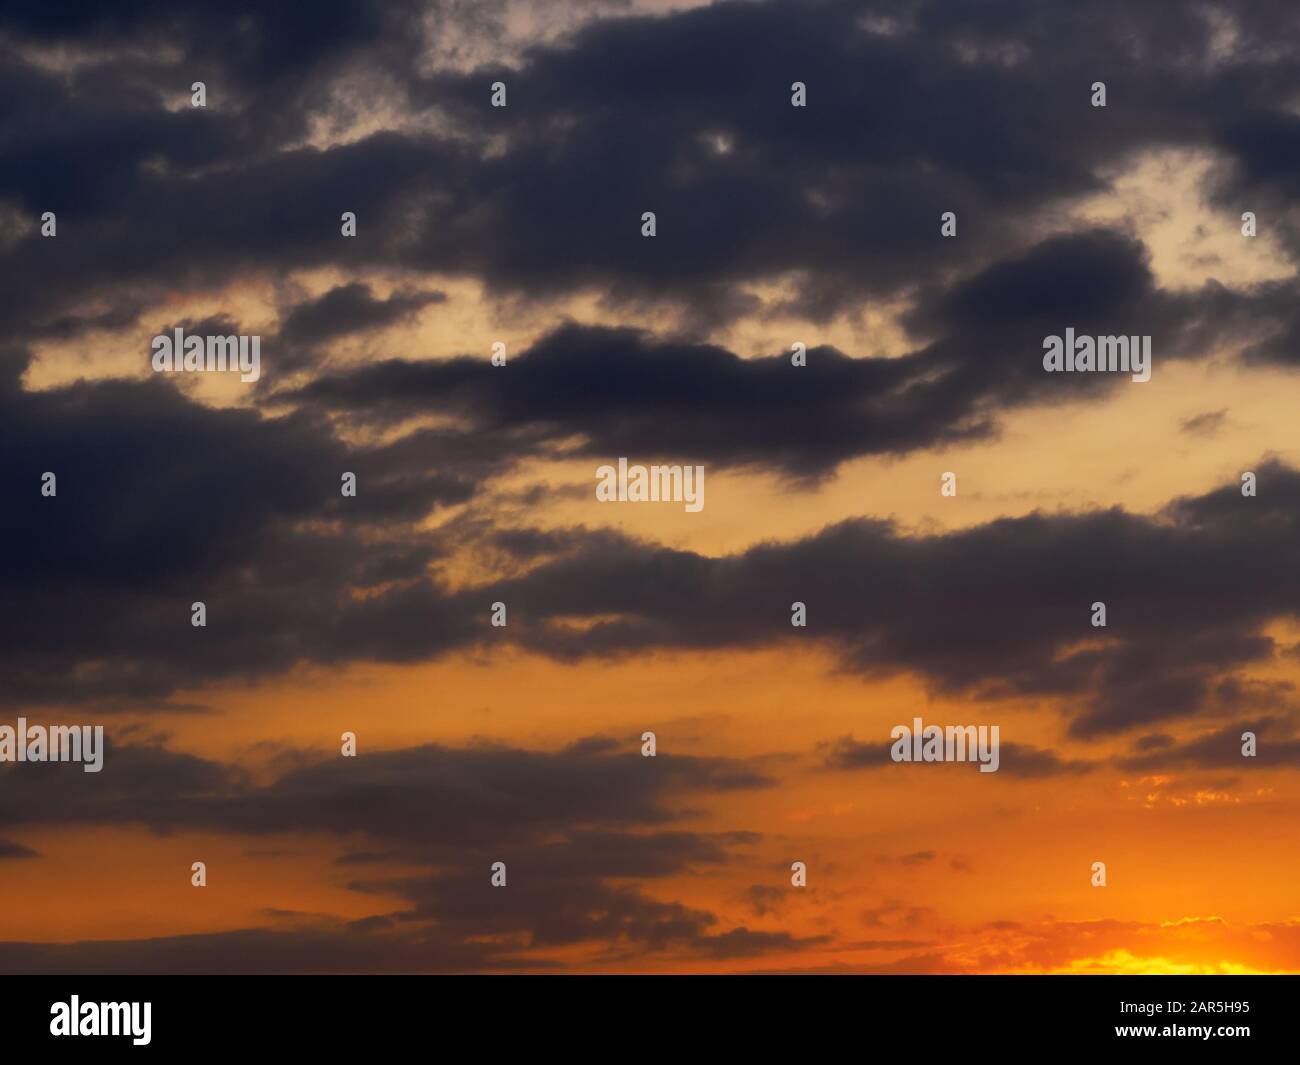 Dark gray clouds on a red sunset sky Stock Photo